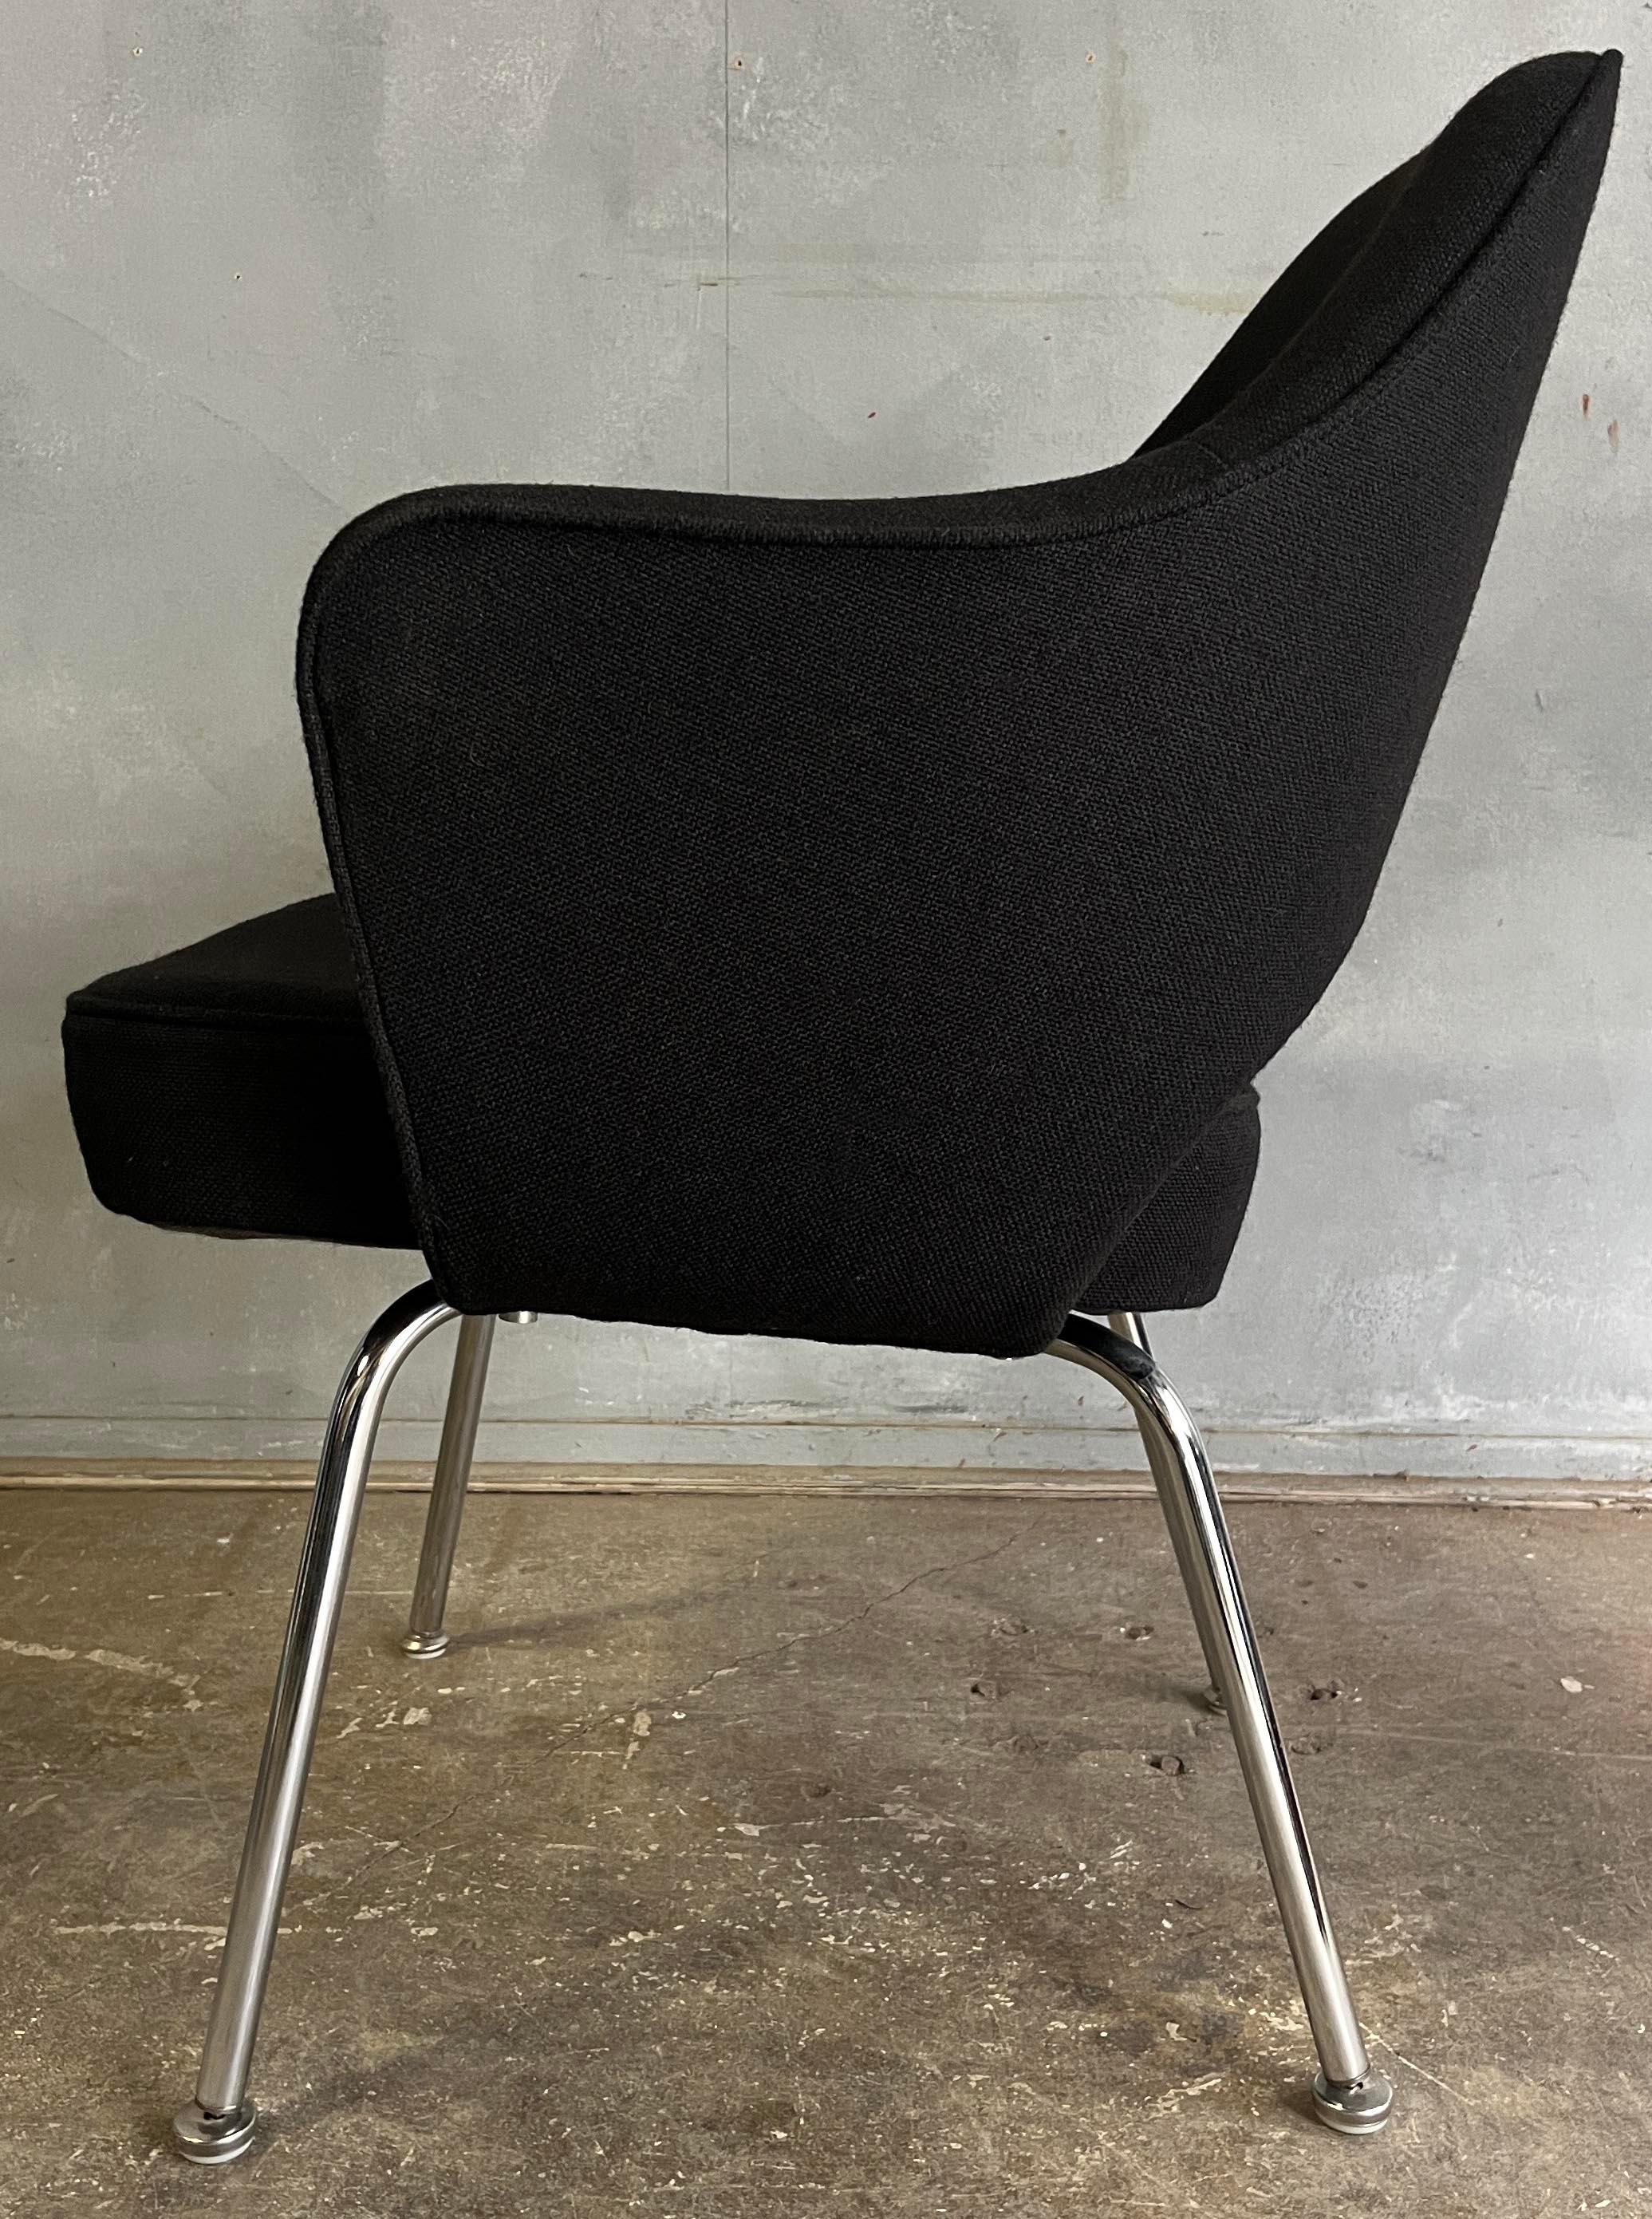 For your consideration are these Eero Saarinen for Knoll executive chairs. With black fabric and wool upholstery by Knoll. 
These are from the 60's and 70's and have been reupholstered by Citron in the 80's (a company that specialized in recovering